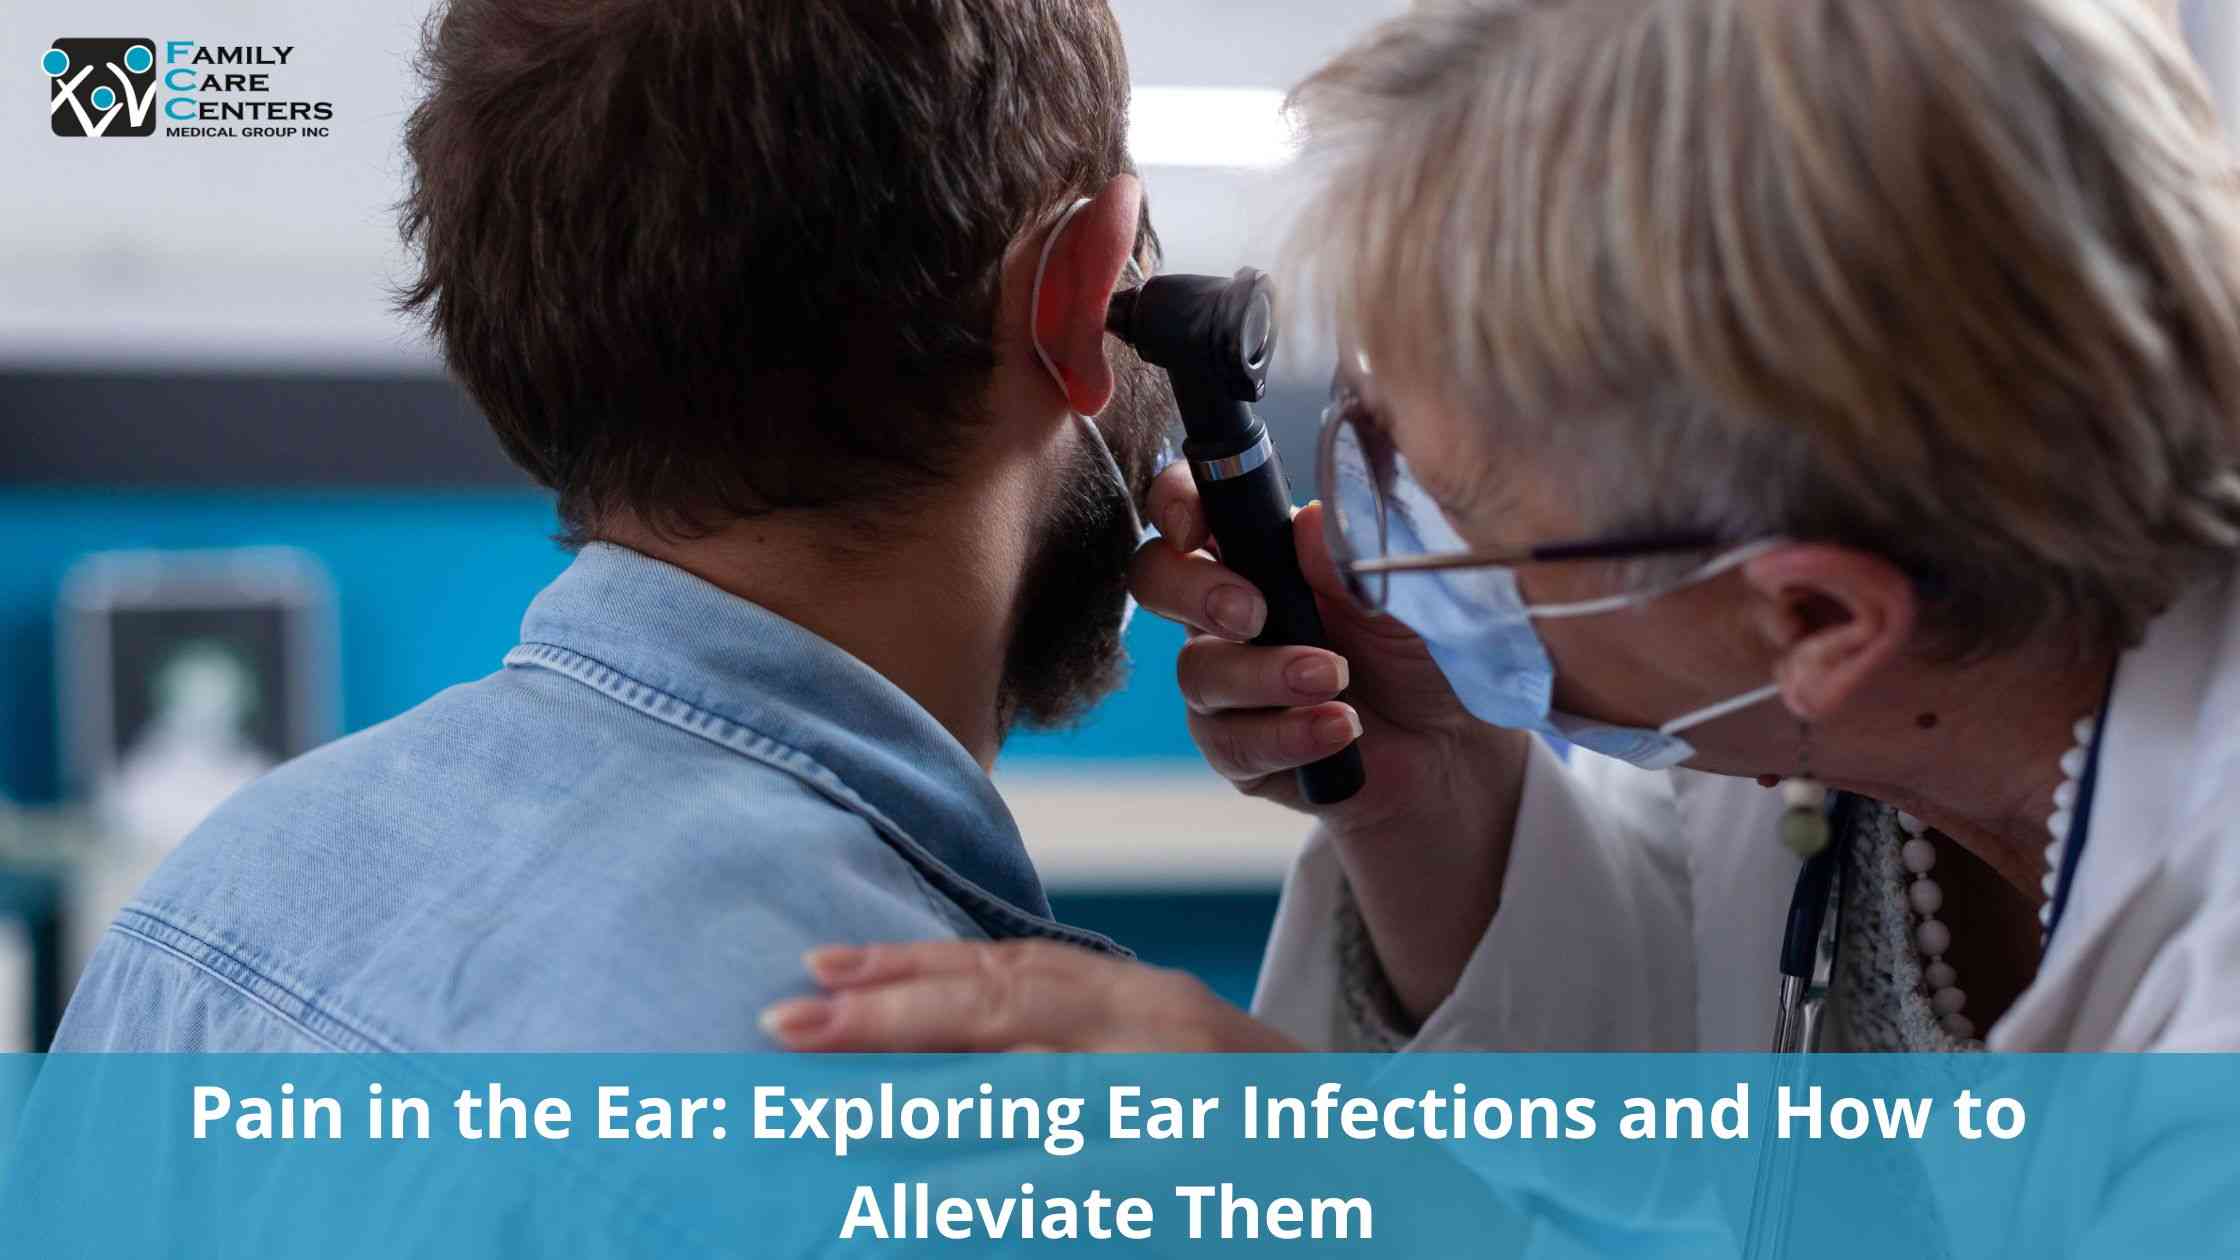 Pain in the Ear: Exploring Ear Infections and How to Alleviate Them